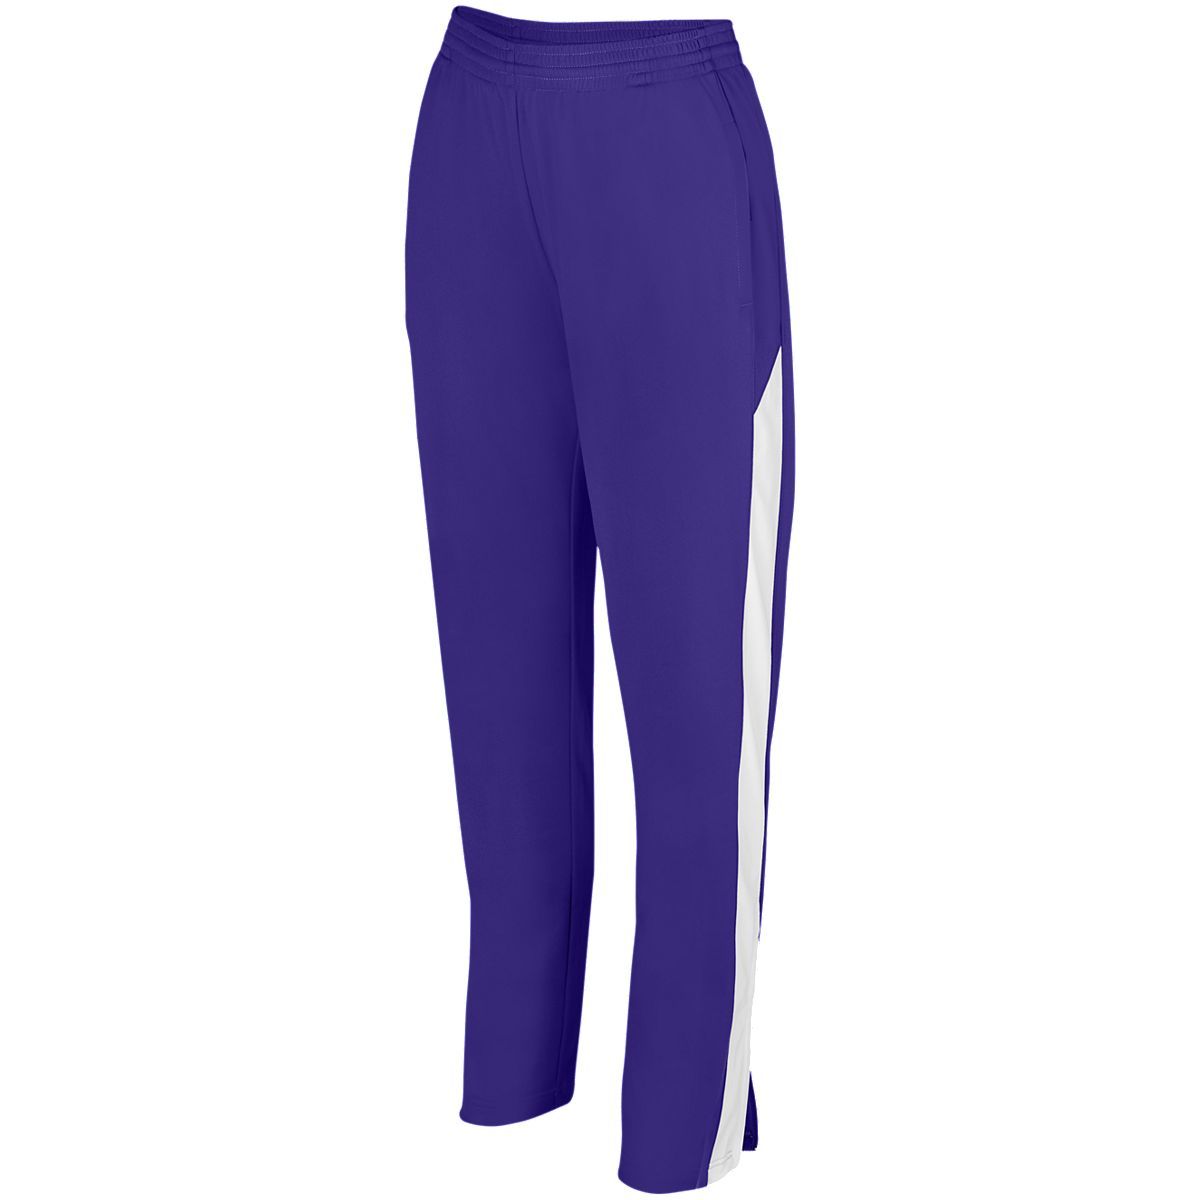 Augusta Sportswear Ladies Medalist Pant 2.0 in Purple/White  -Part of the Ladies, Ladies-Pants, Pants, Augusta-Products product lines at KanaleyCreations.com